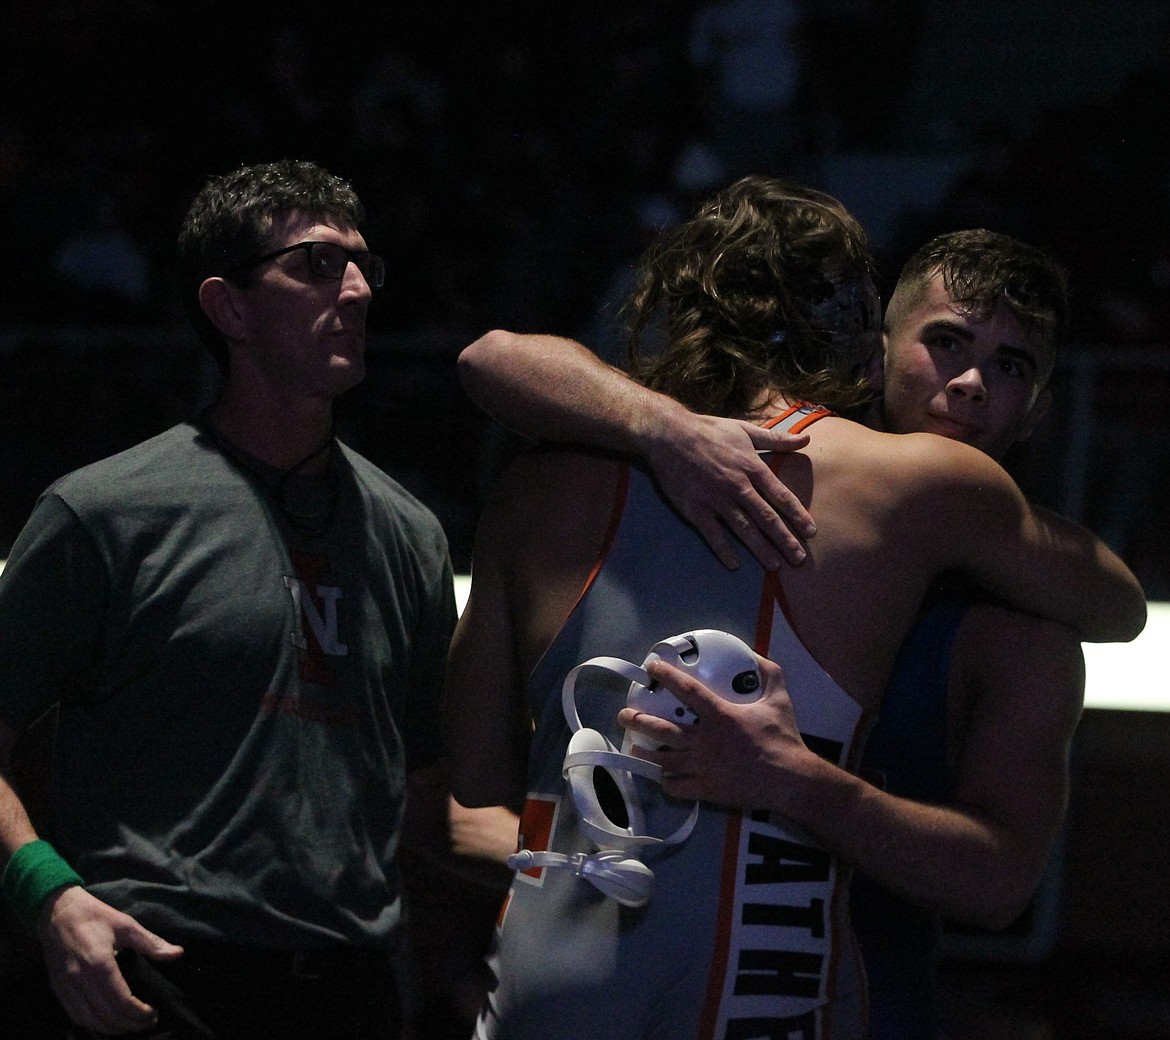 JASON ELLIOTT/Press
Coeur d'Alene's Rylan Rogers gets a hug from Flathead's Chase Youso following the 195-pound championship match at the Tri-State Invitational on Saturday at North Idaho College. Rogers won by pin in 3 minutes, 26 seconds.